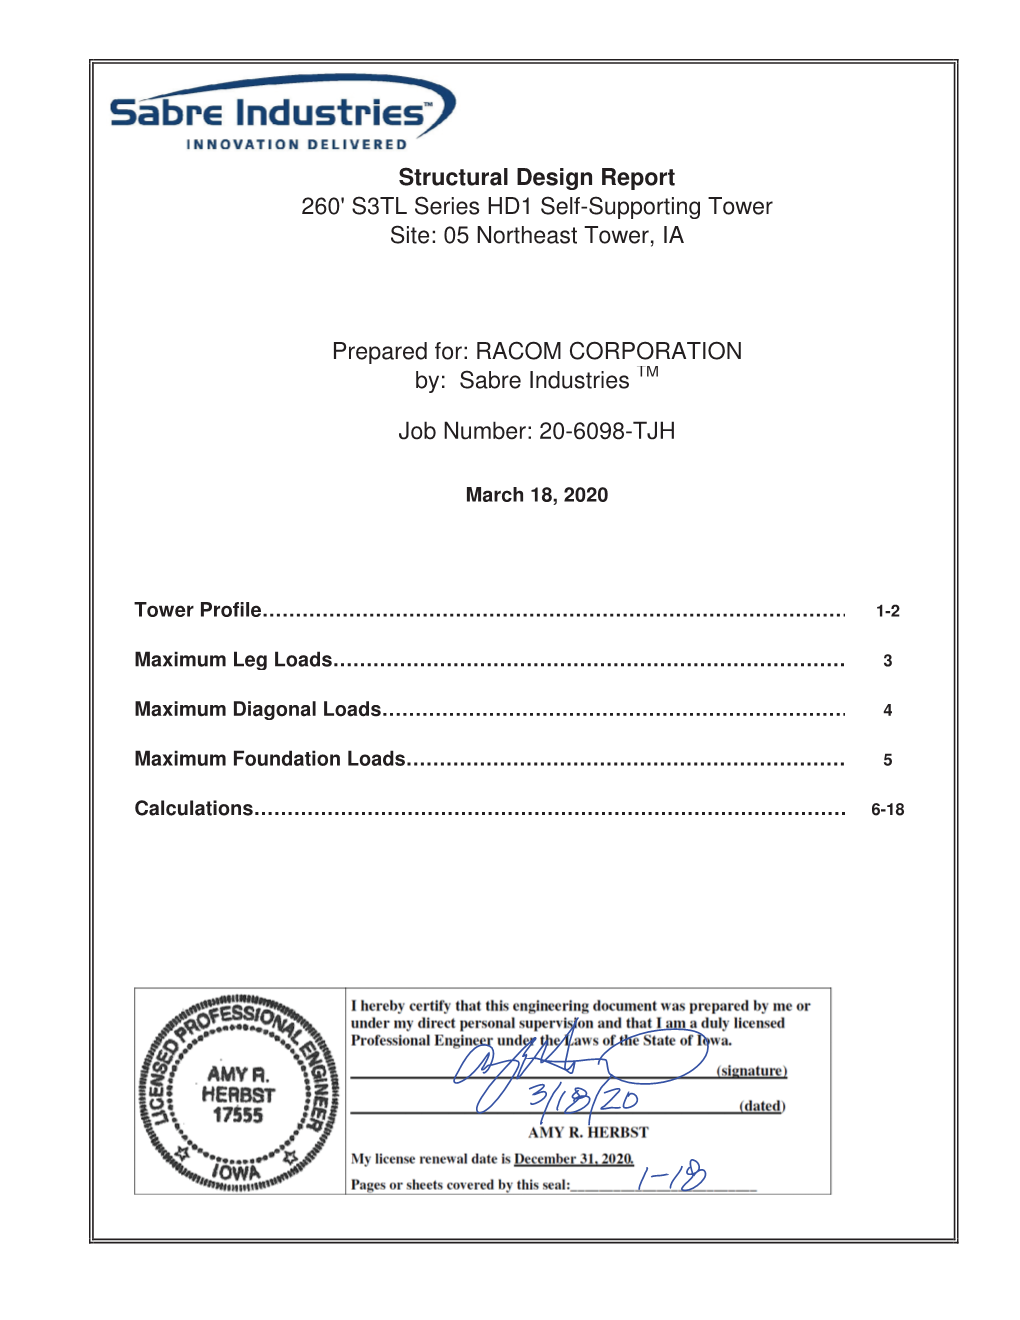 Structural Design Report 260' S3TL Series HD1 Self-Supporting Tower Site: 05 Northeast Tower, IA